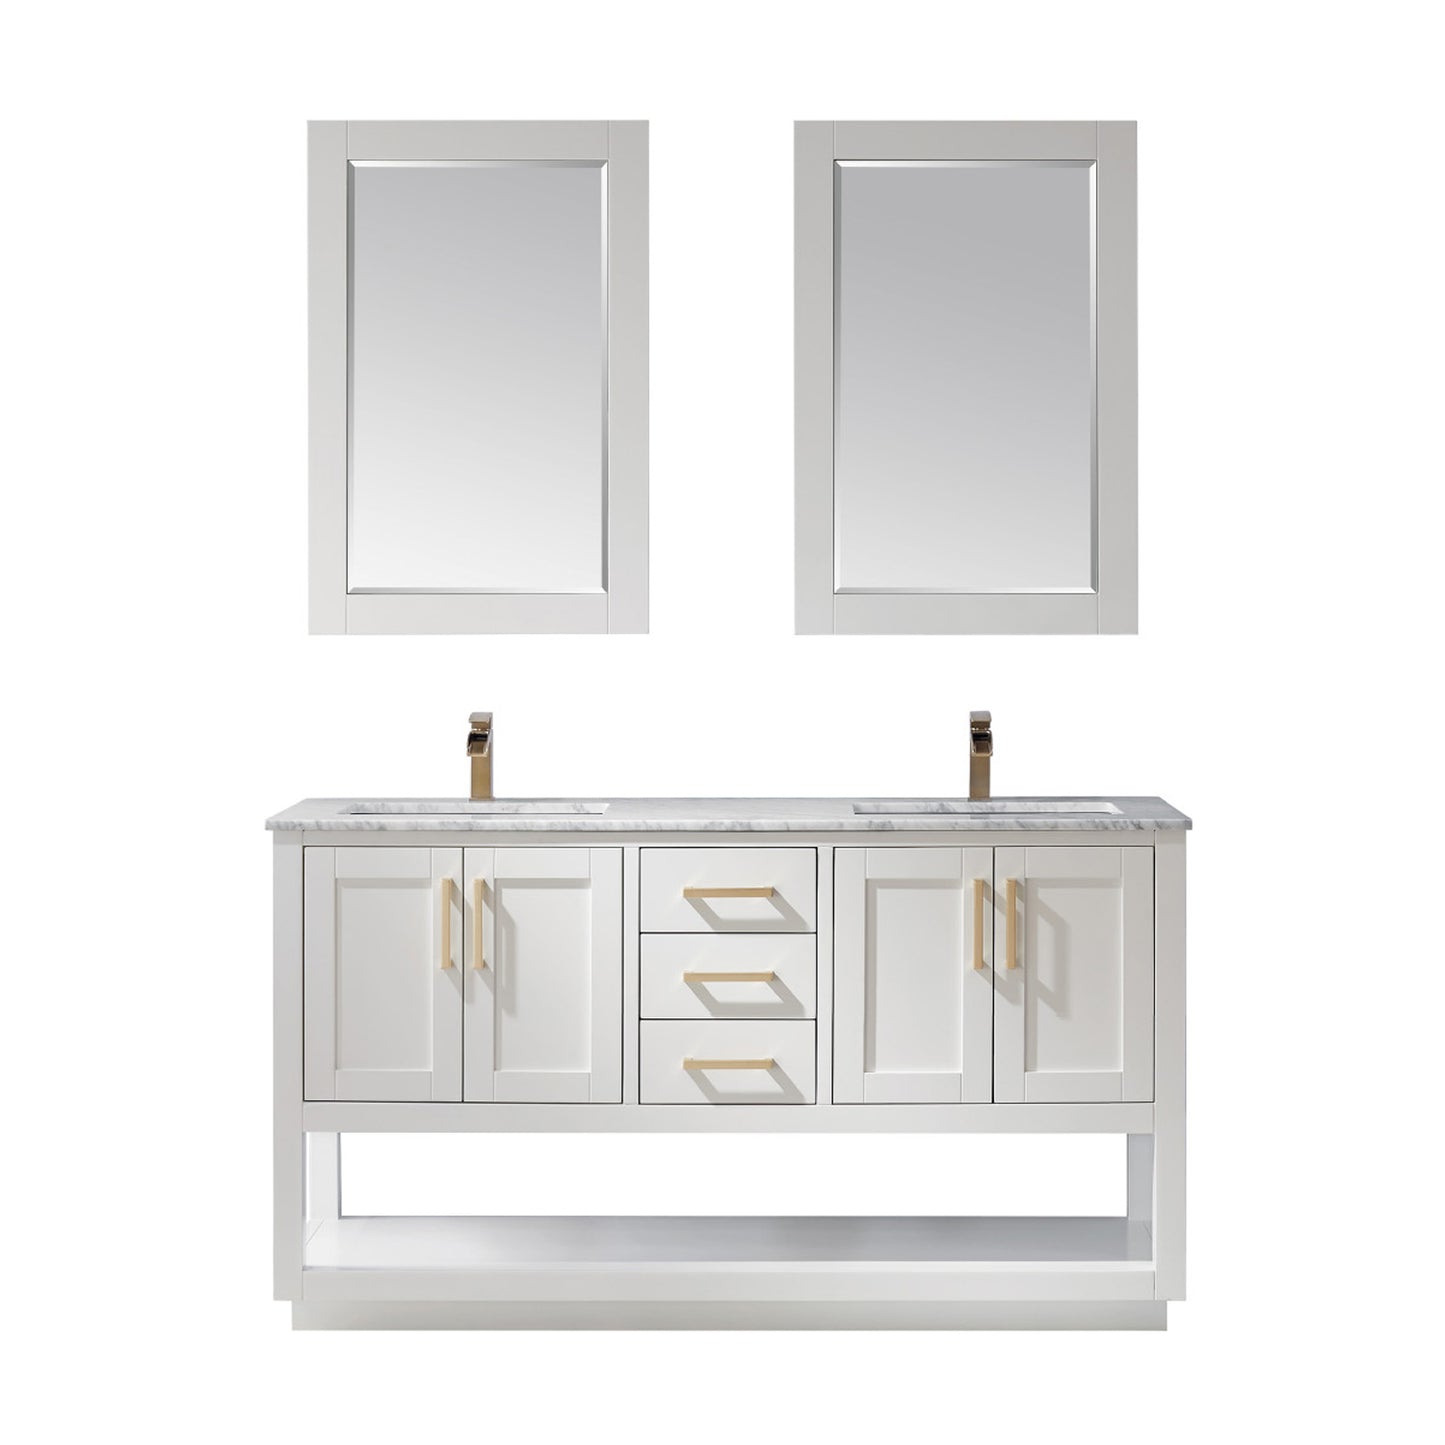 Remi 60" Double Bathroom Vanity Set with Carrara White Marble Countertop - Altair